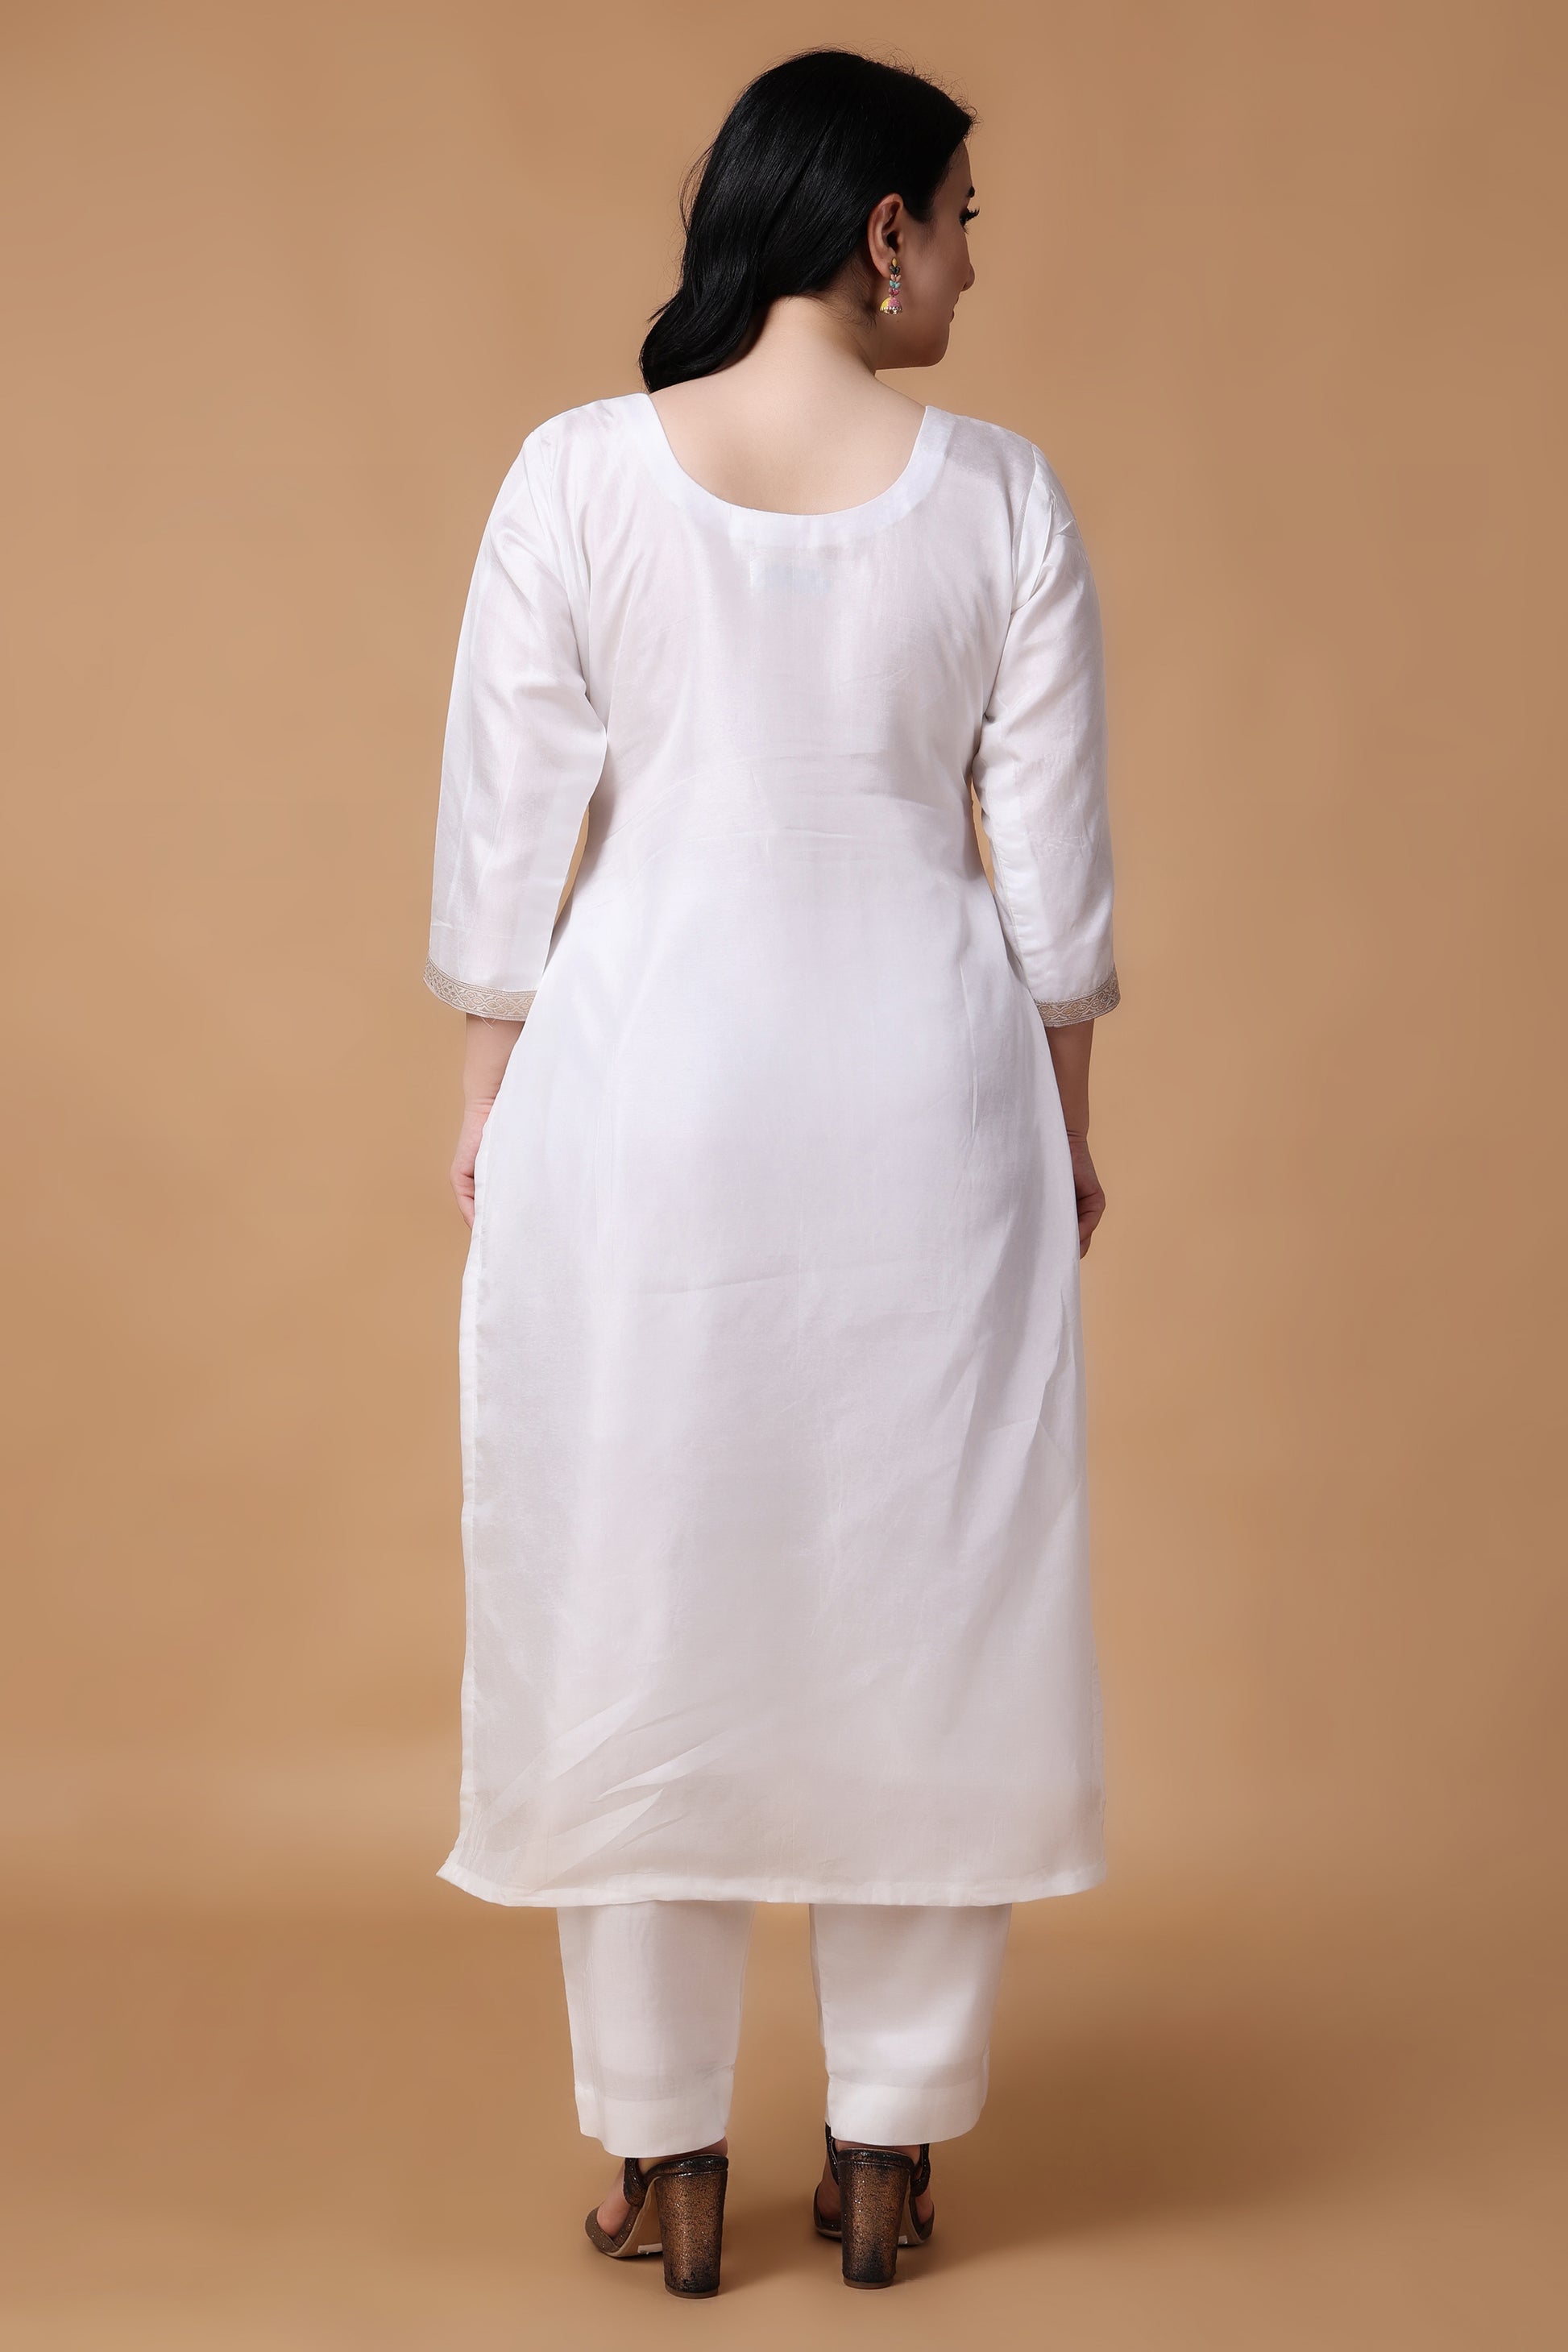 White Suit For Women 